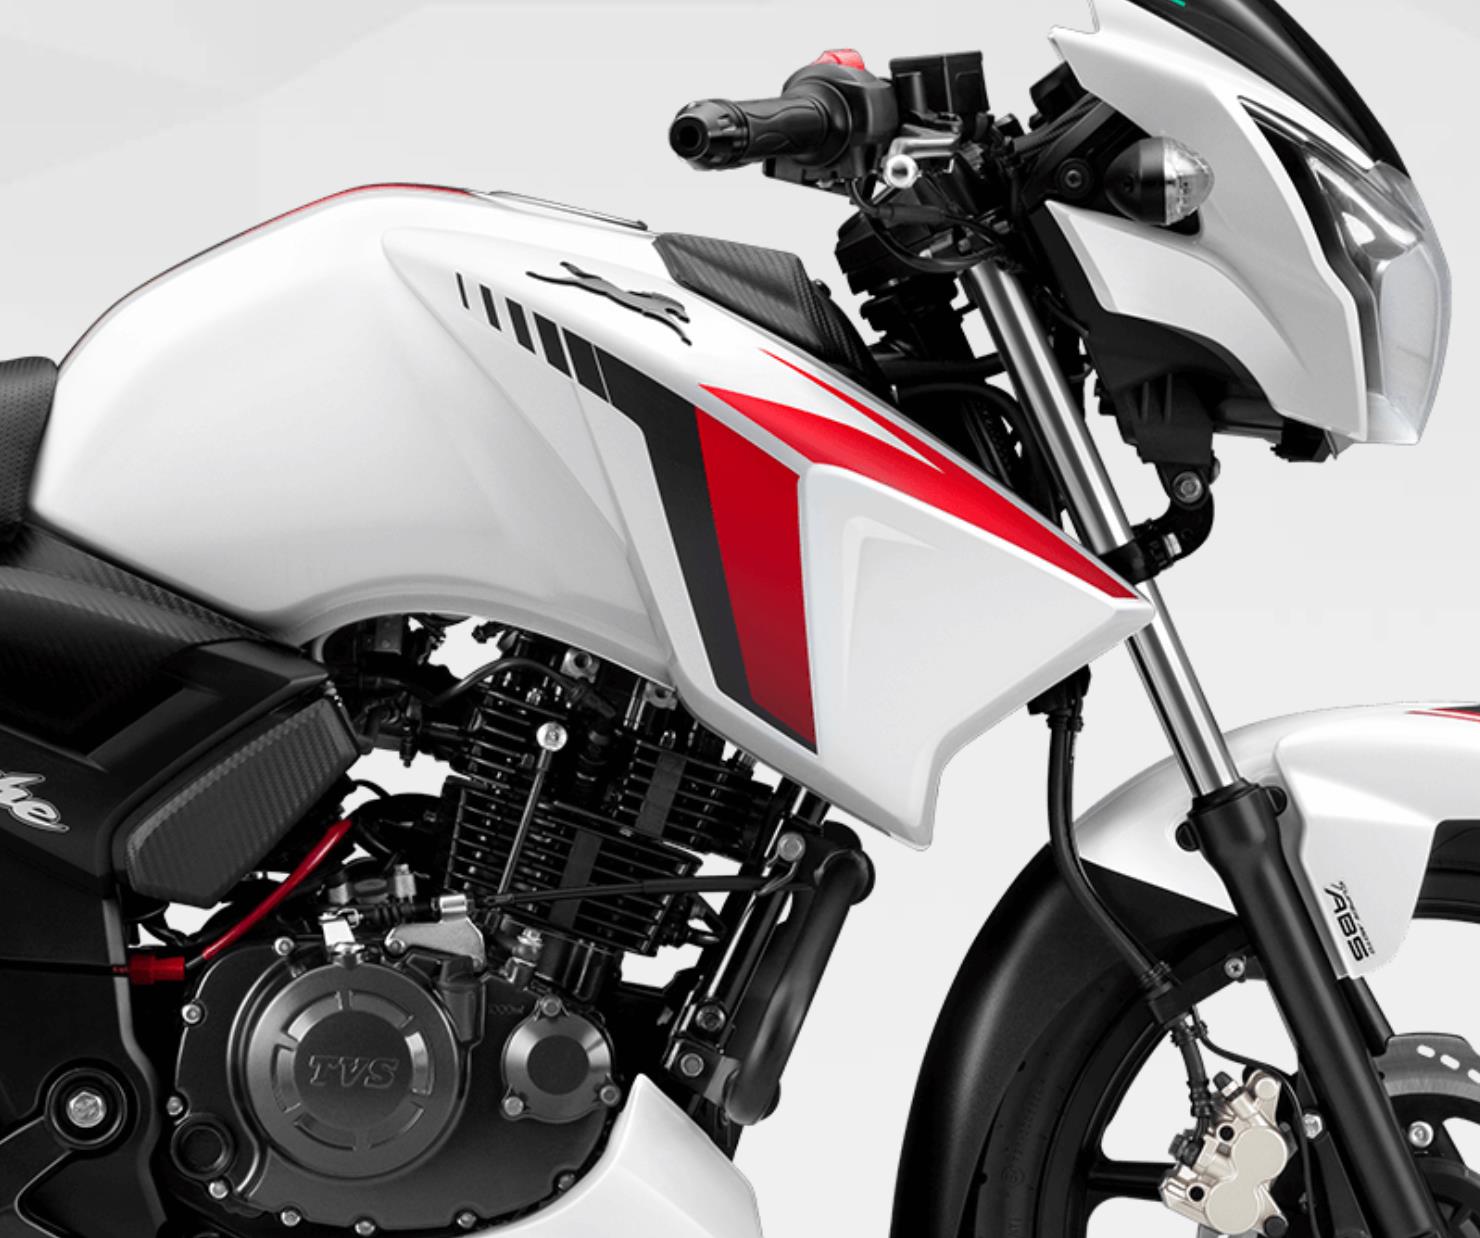 Tvs Apache Rtr 160 2v Disc Price Specs Top Speed Mileage In India